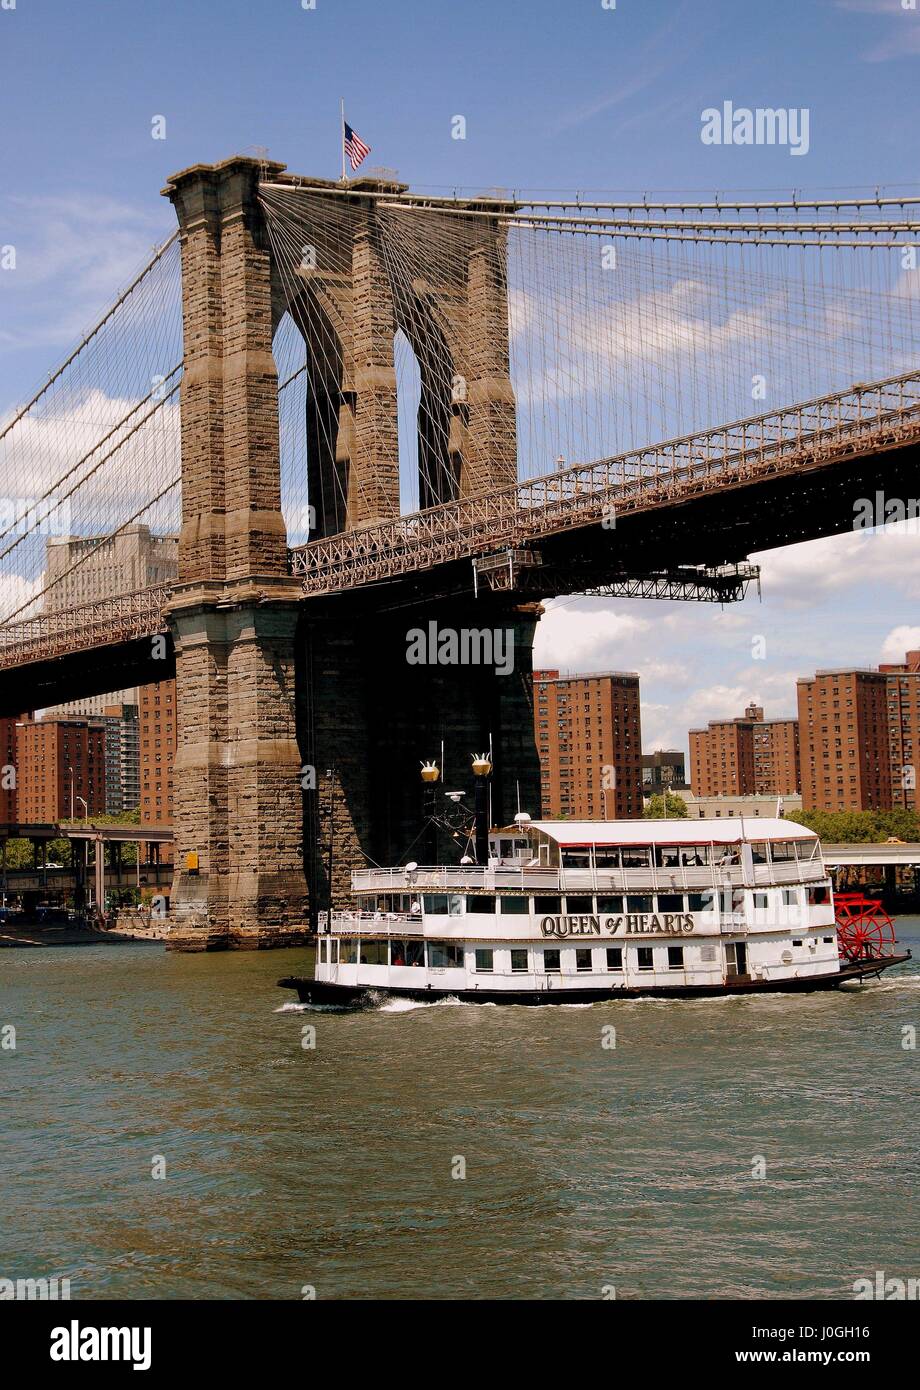 New York City - July 19, 2009:  Brooklyn Bridge west tower and Queen of Hearts touring boat on the East River Stock Photo